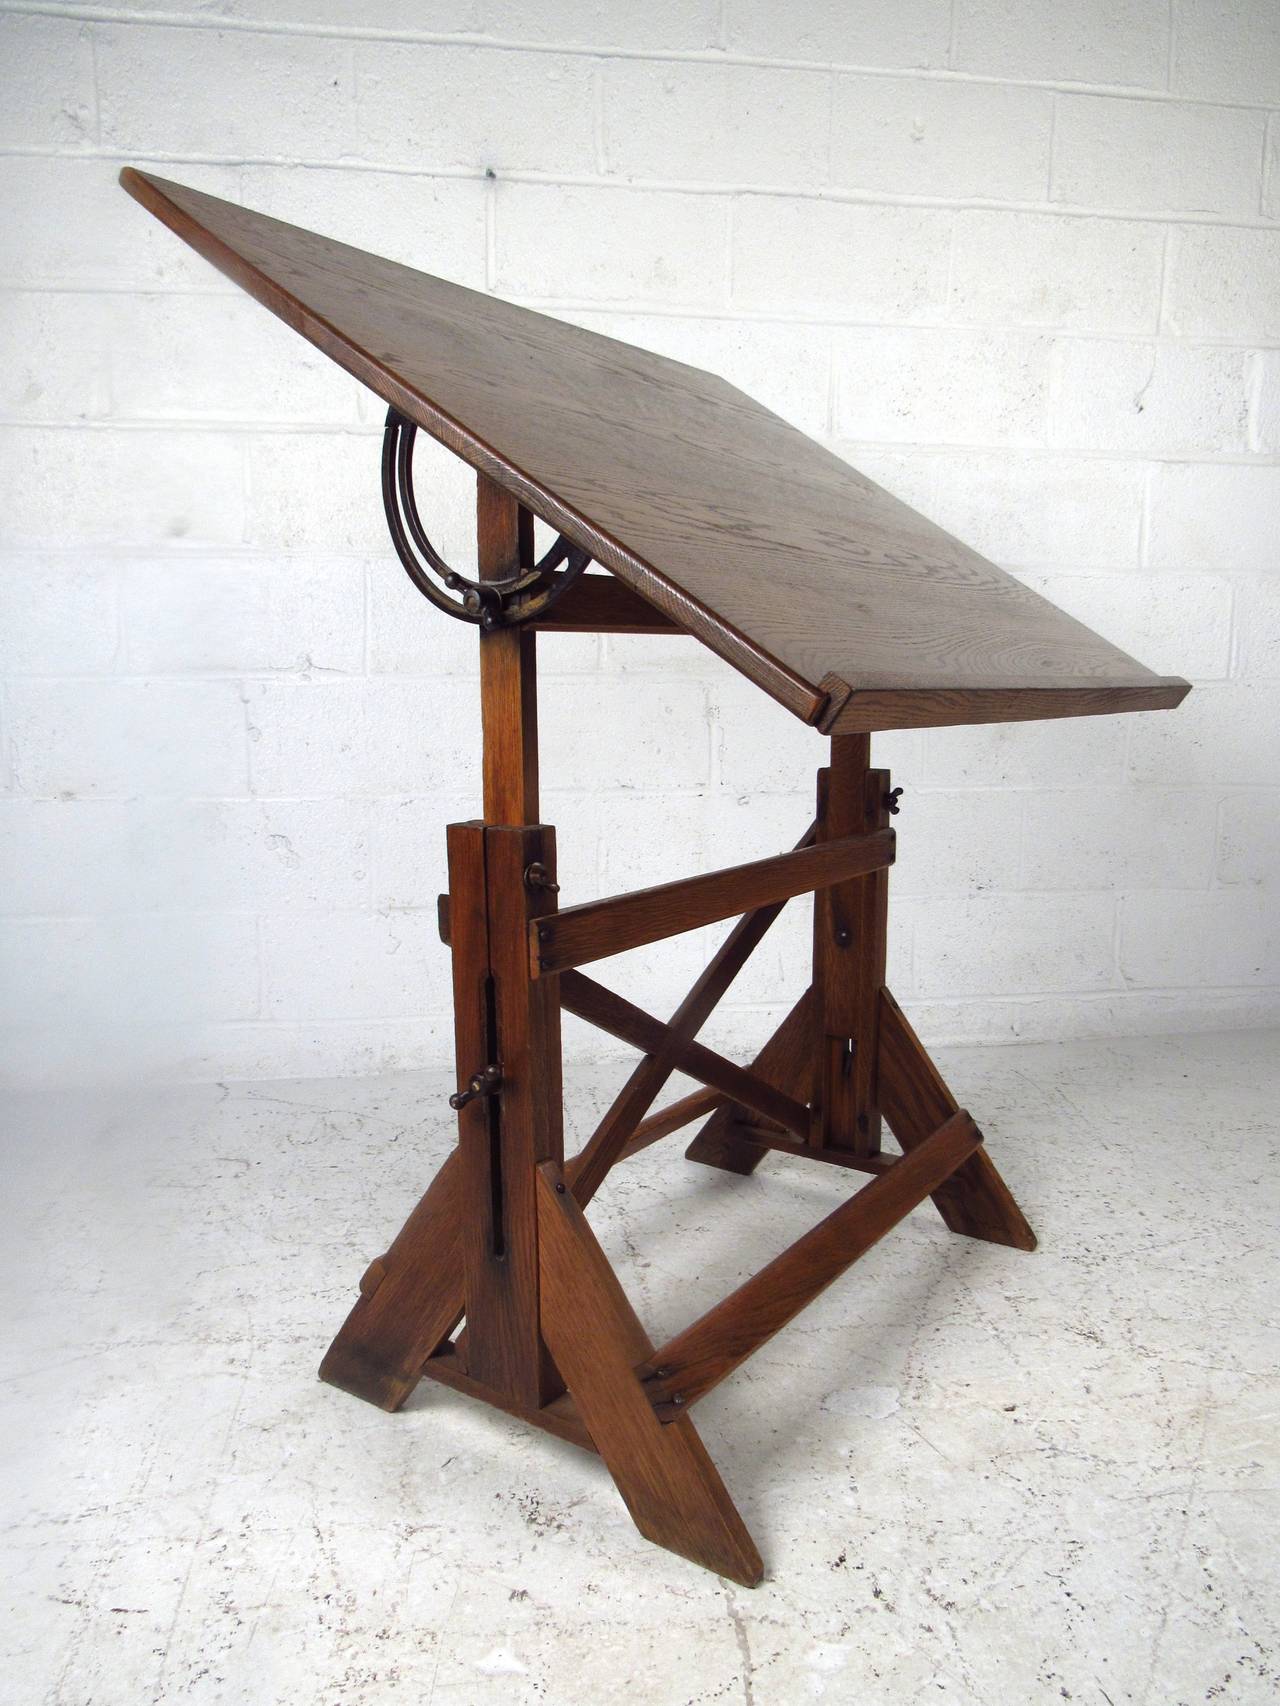 This circa 1940's drafting table is well constructed and easily adjusted for use as a practical workspace. Fantastic mix of oak and cast iron, this rustic drafting table makes a truly unique addition to any home, business, or office. Please confirm